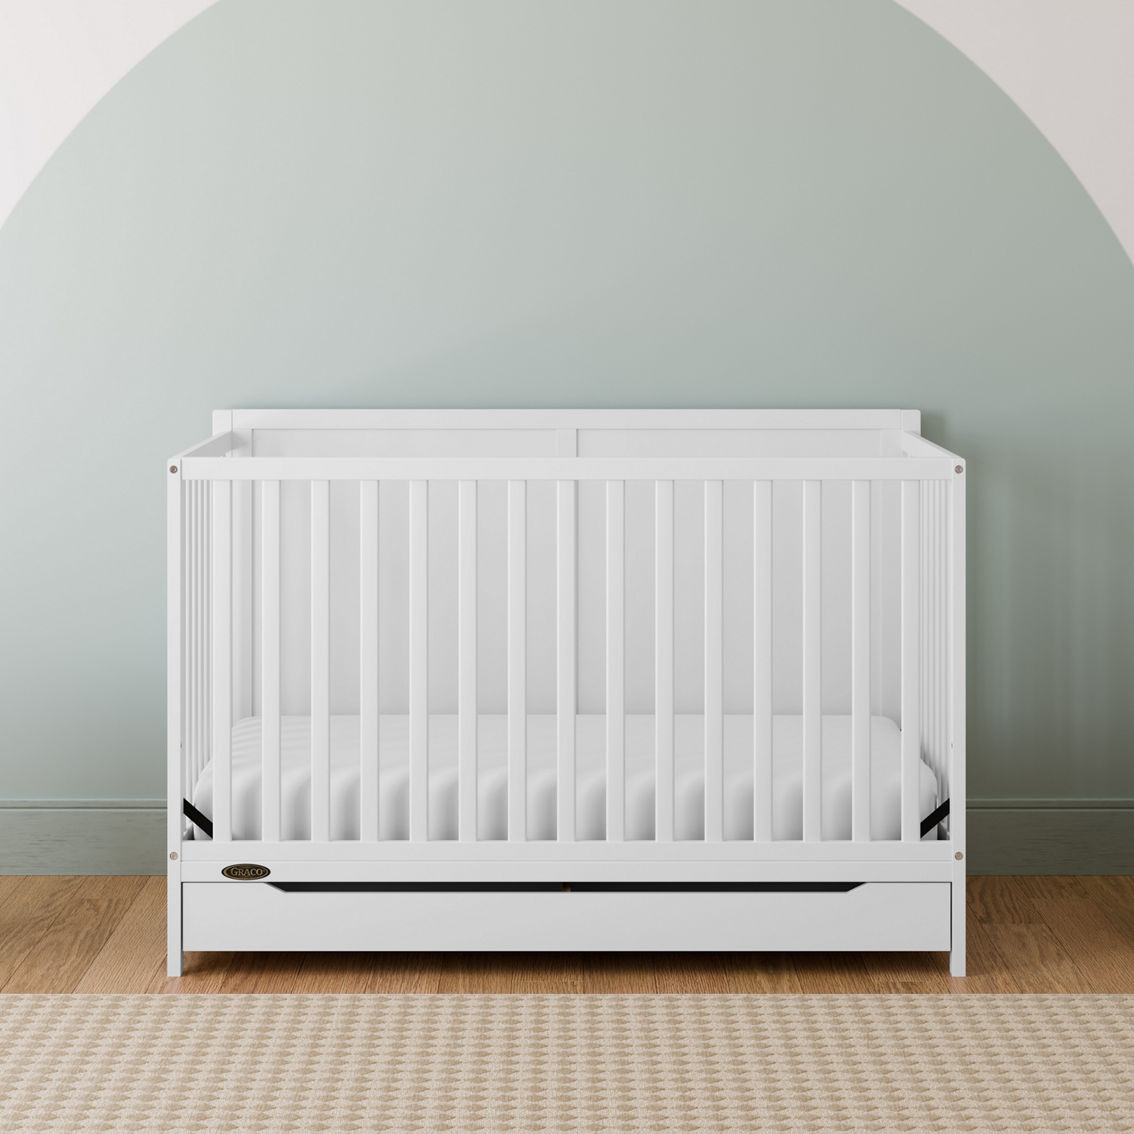 Graco Melrose 5-in-1 Convertible Crib with Drawer - Image 9 of 10